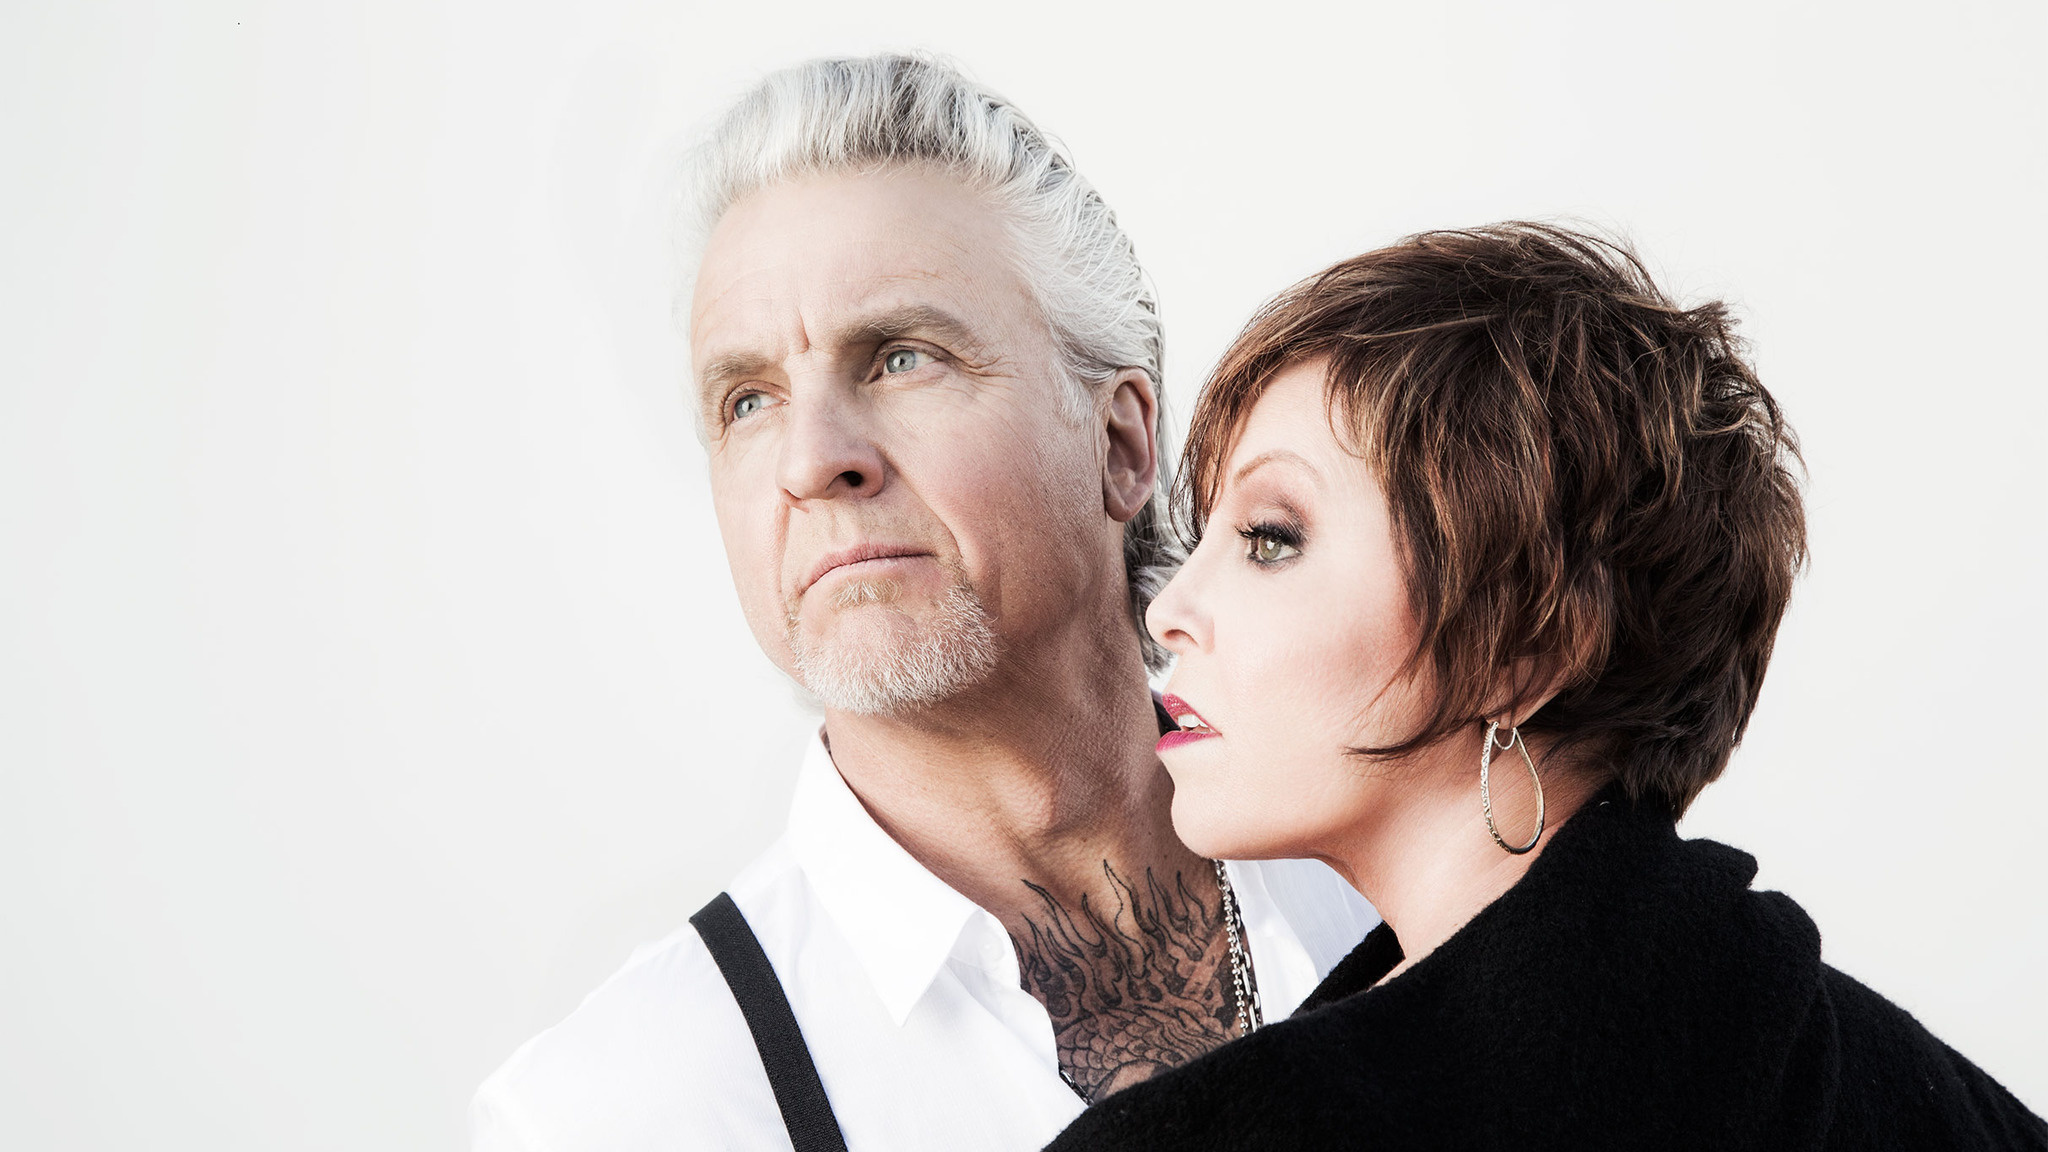 Pat Benatar and Neil Giraldo at Mayo Civic Center, Intimate acoustic evening, Musical magic, Unforgettable experience, 2050x1160 HD Desktop